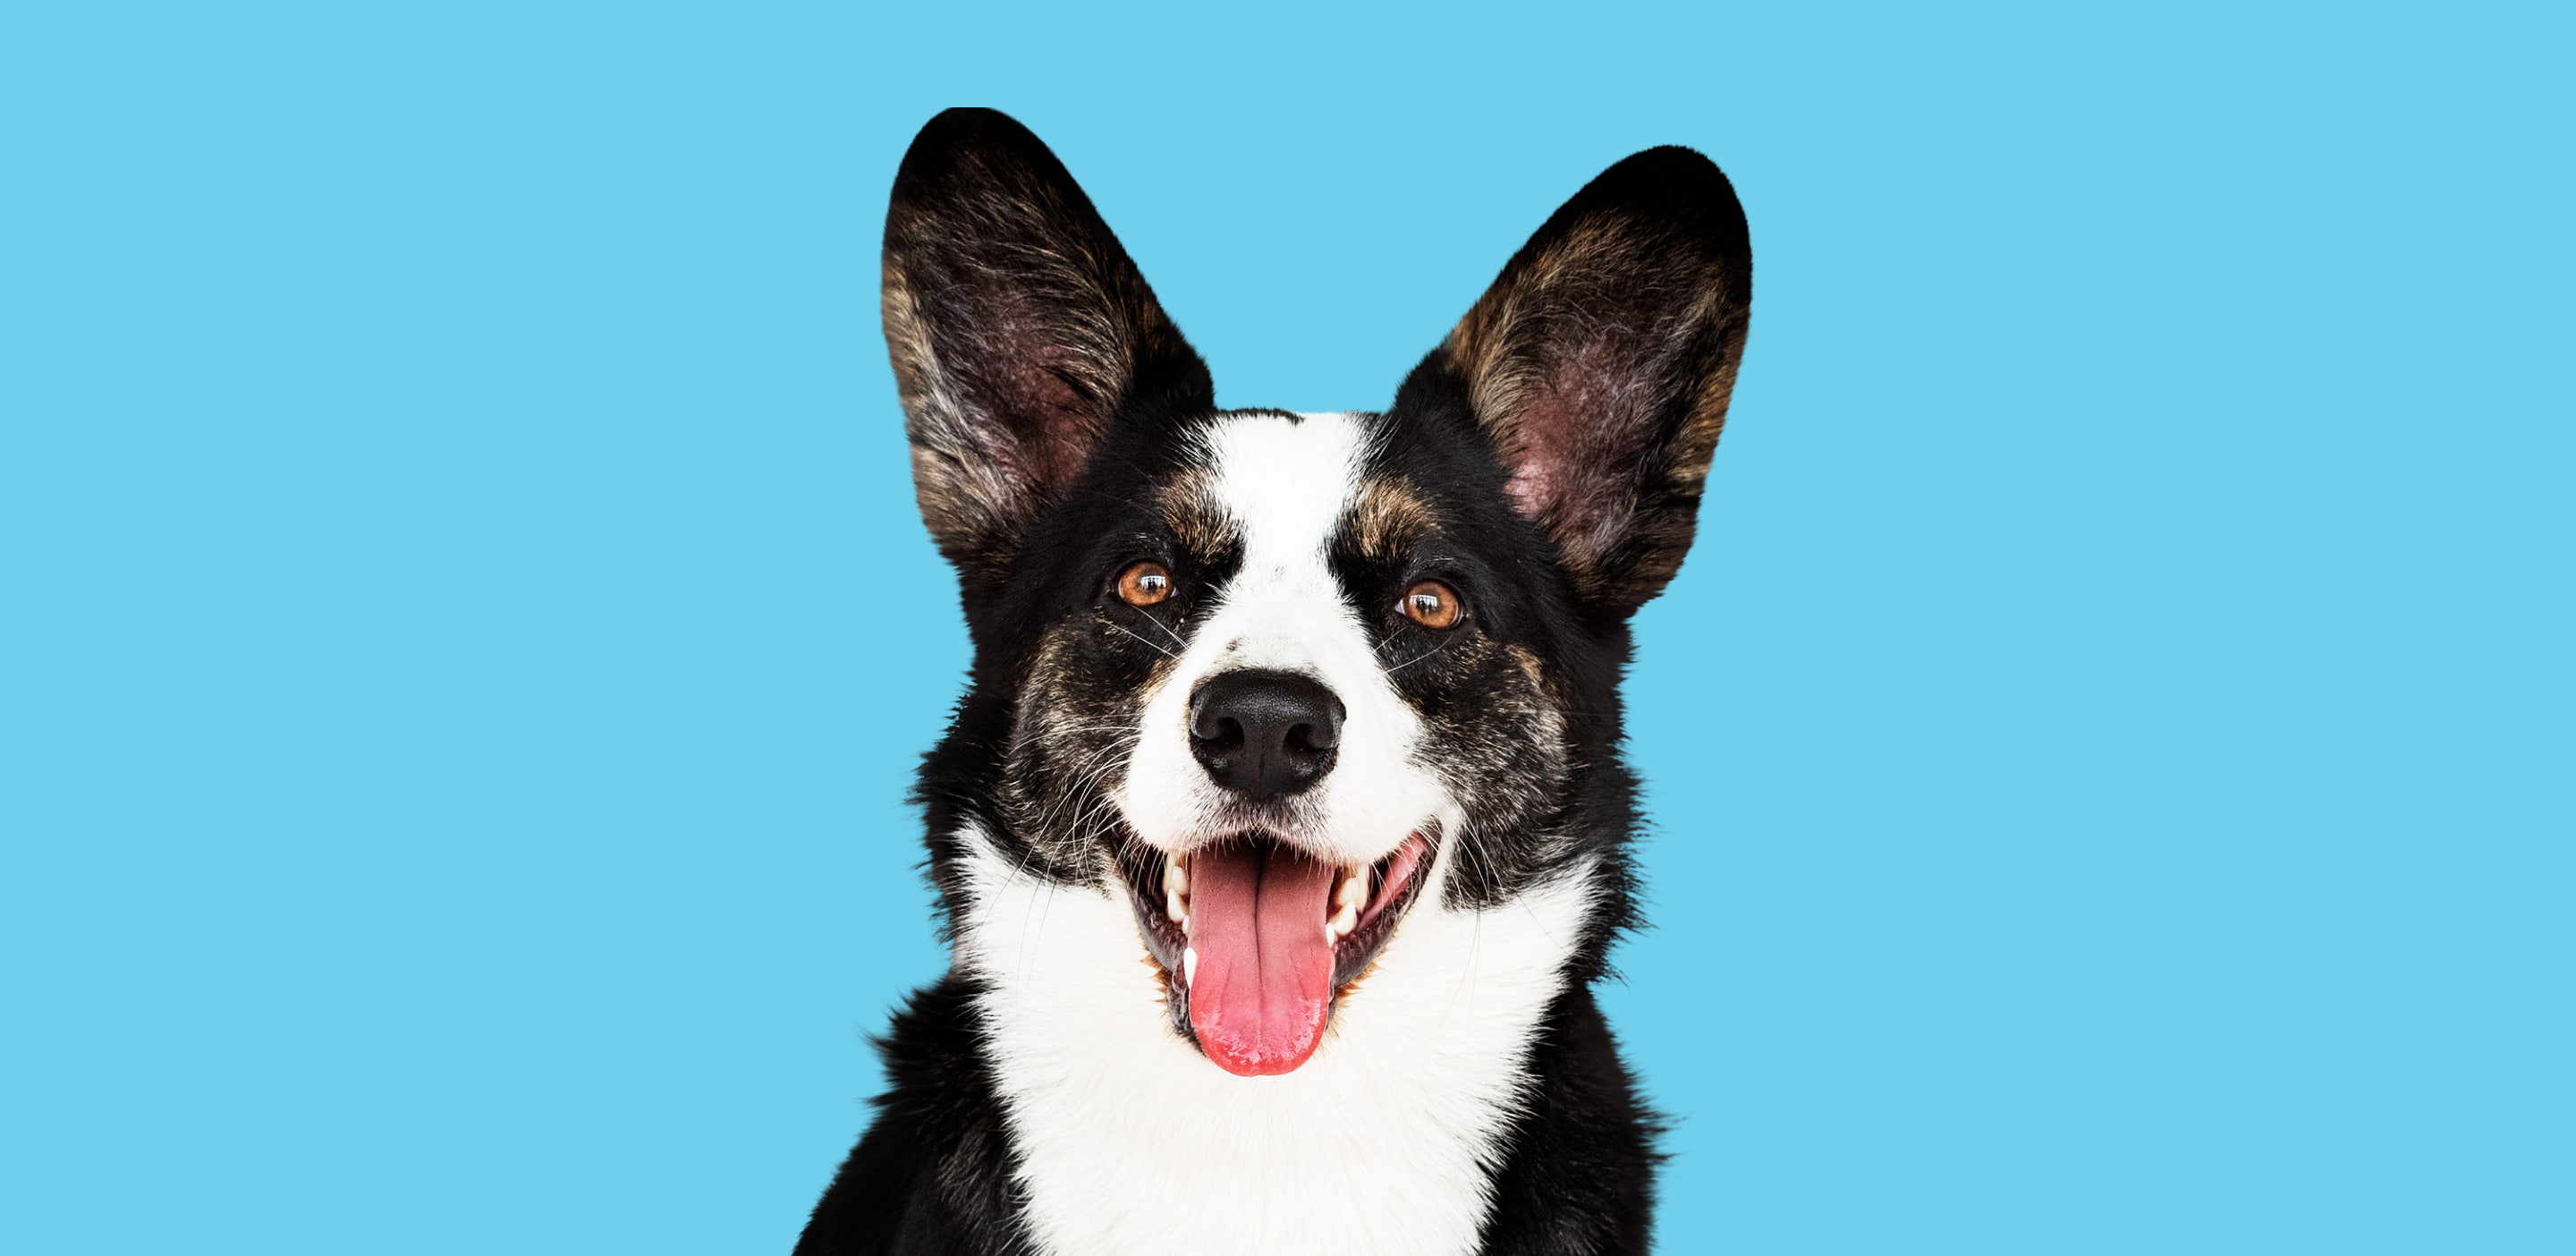 head of a nice black dog with white spots. blue background